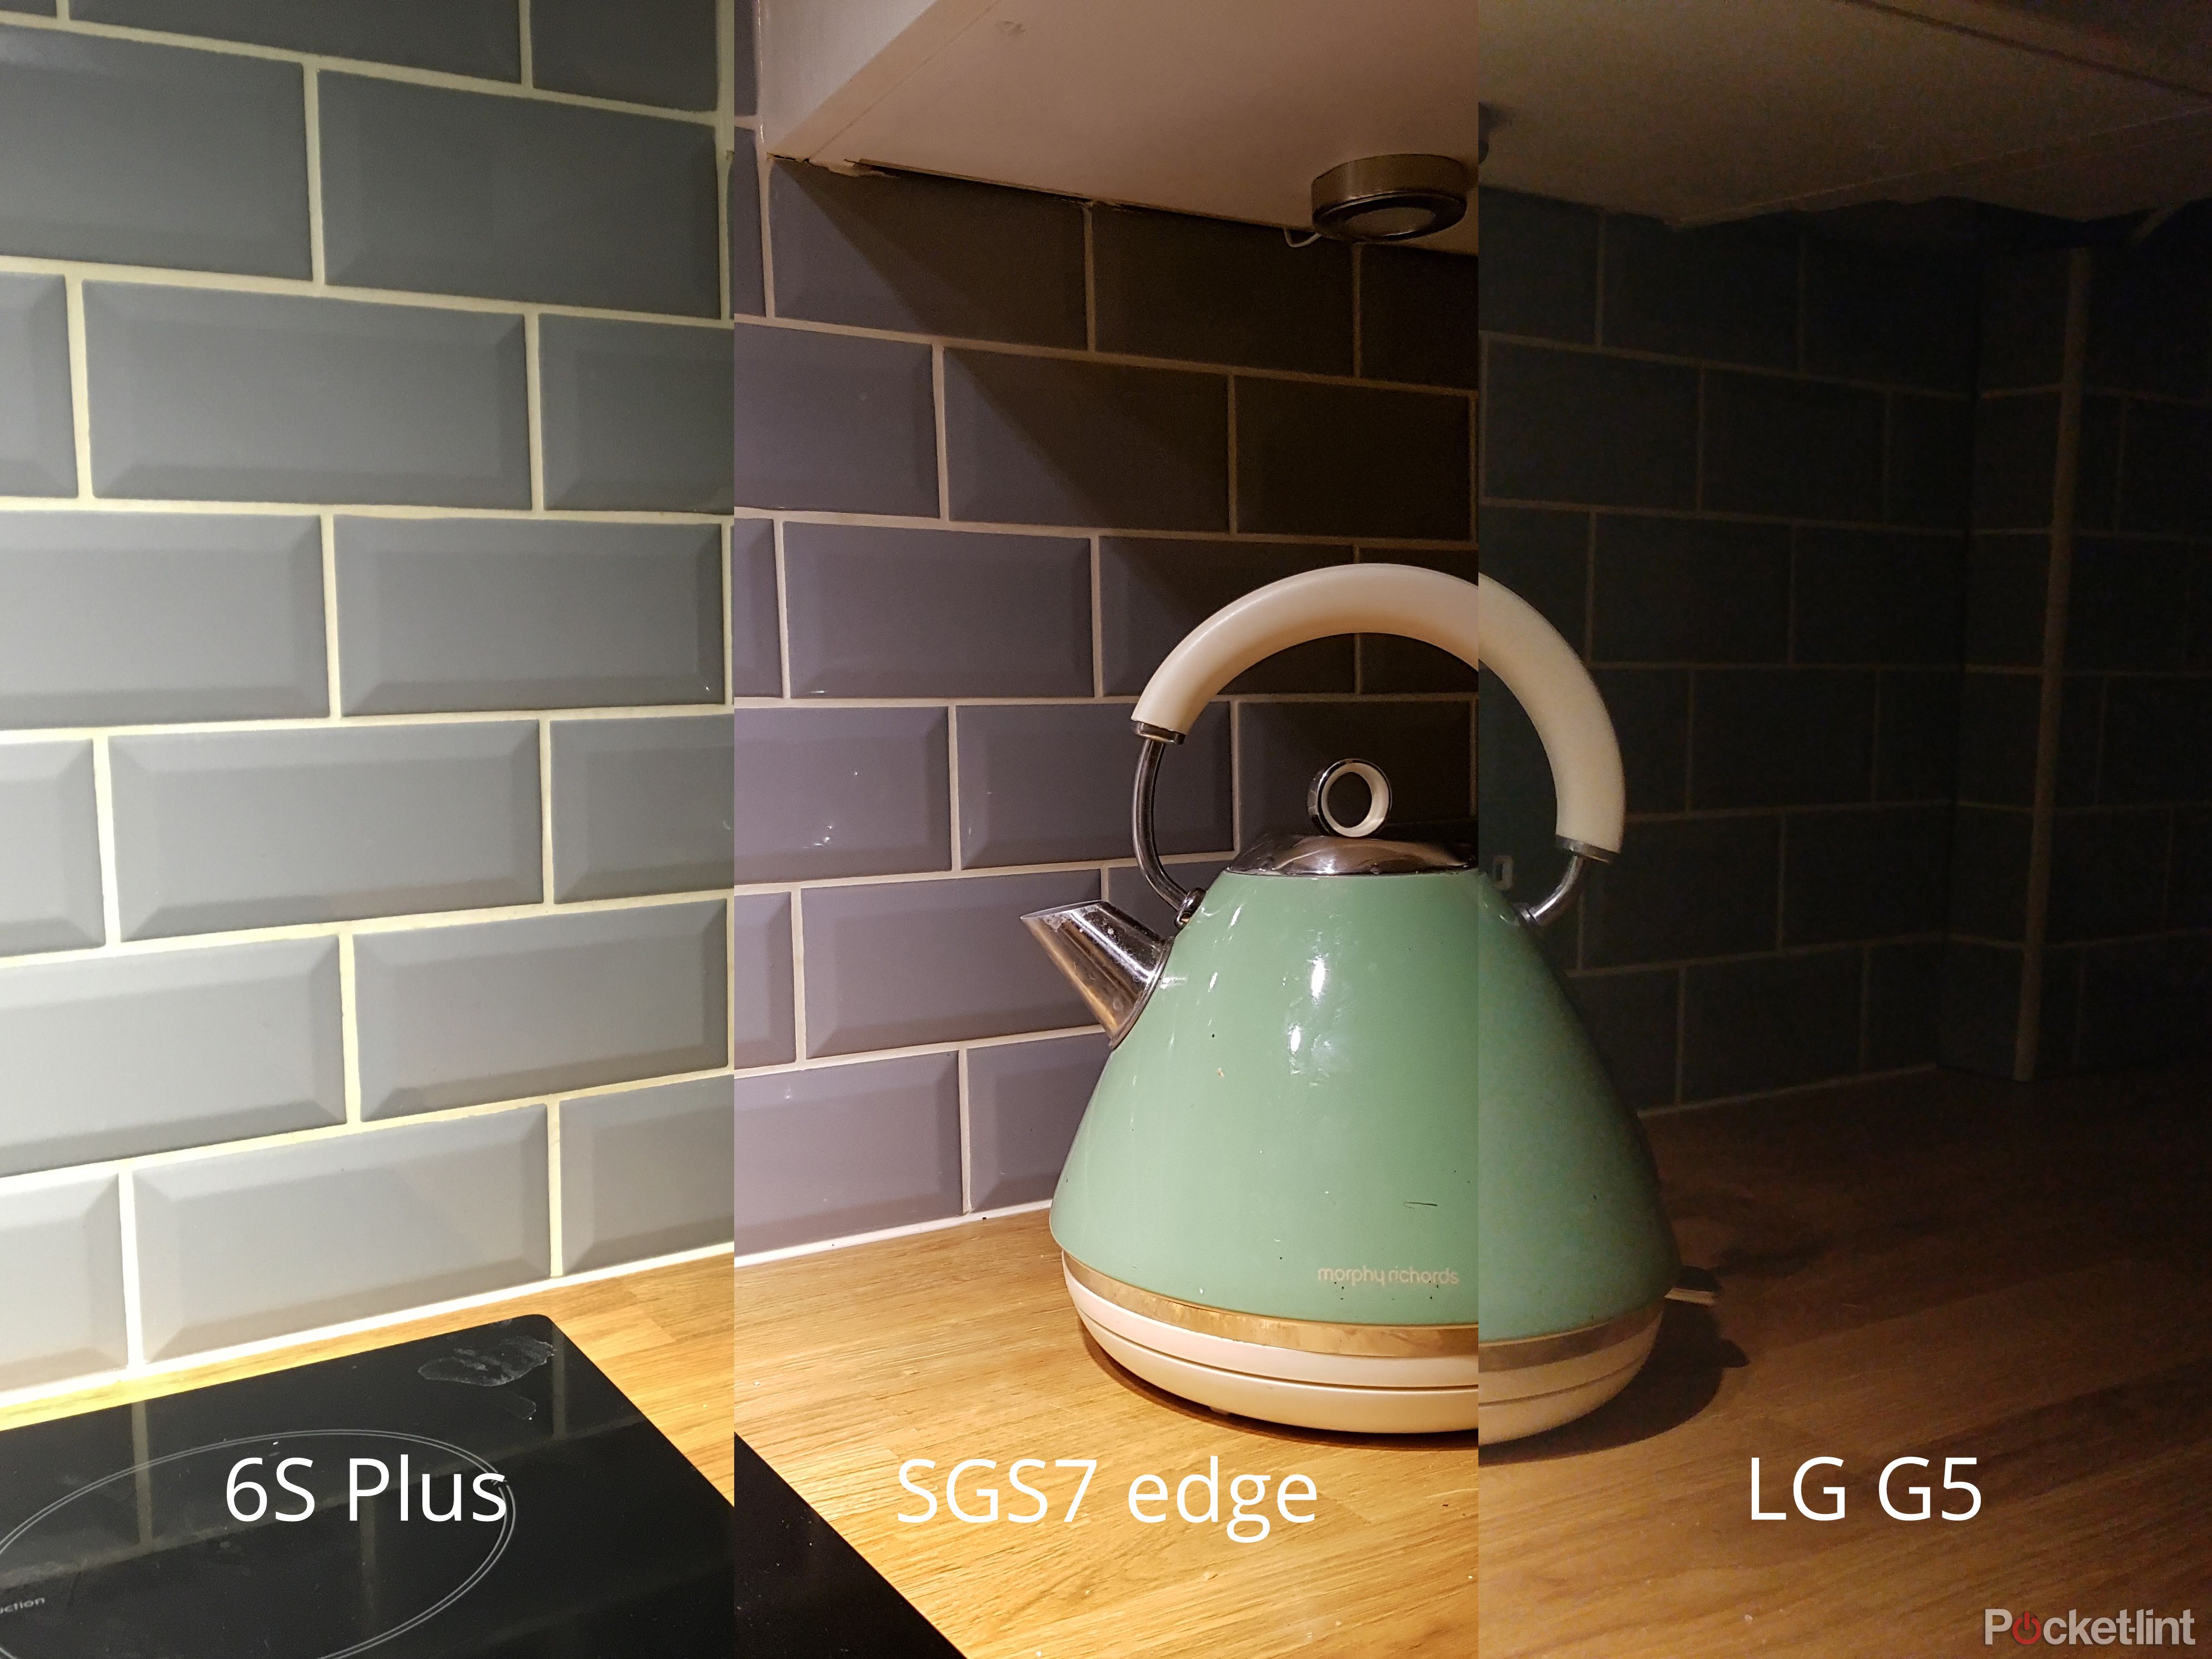 iphone 6s plus vs sgs7 edge vs lg g5 which is best at taking photos image 4